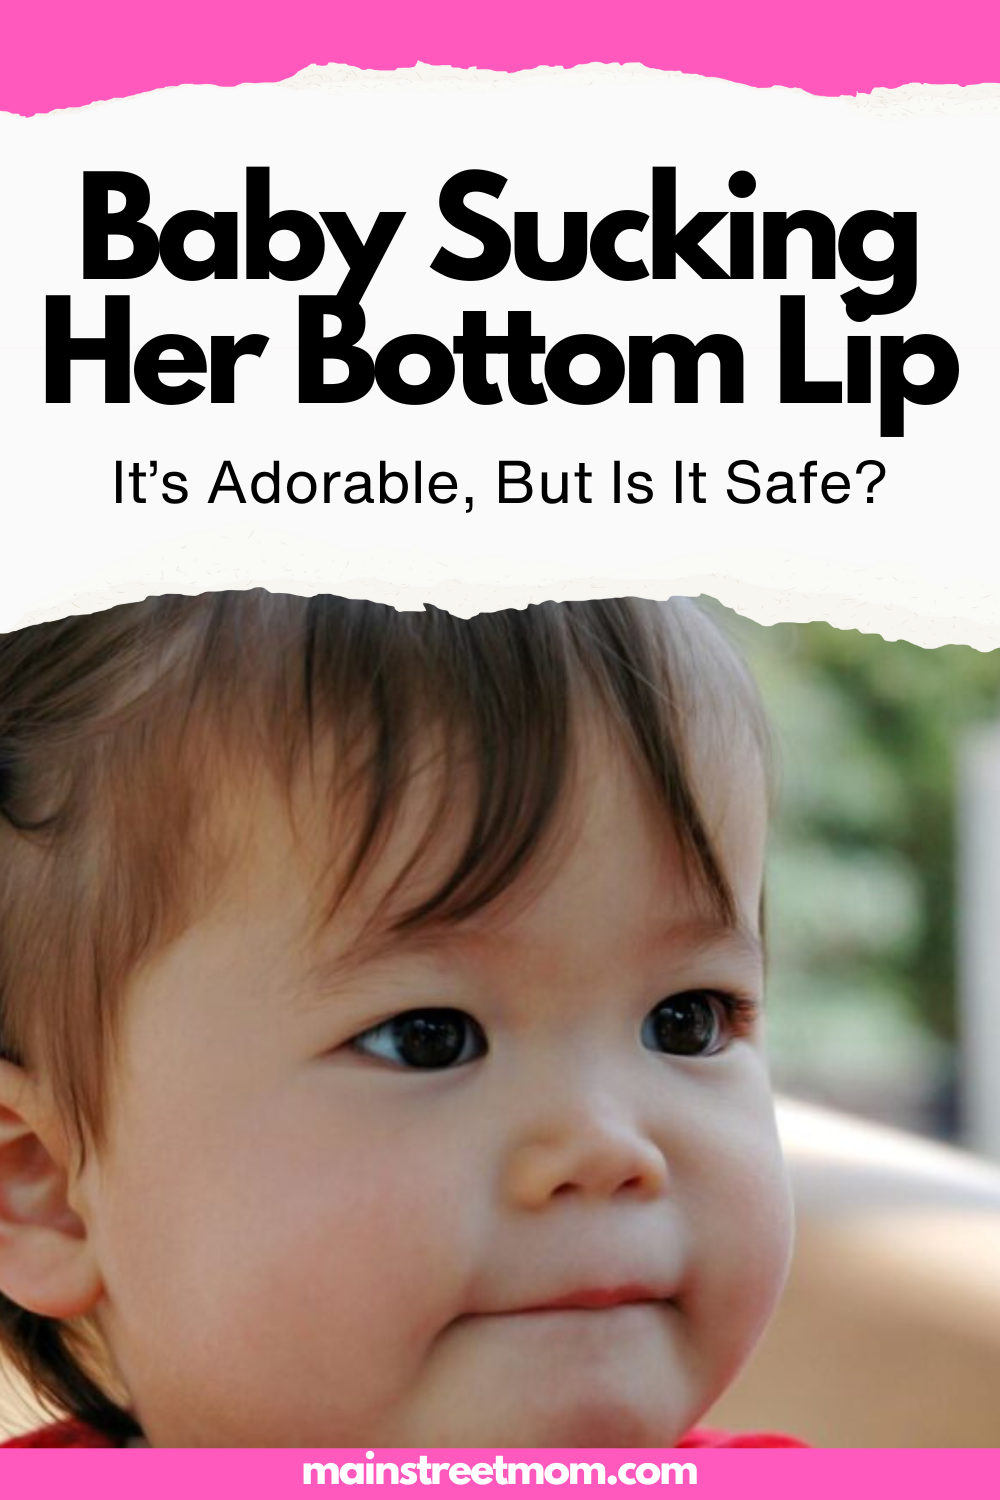 Baby Sucking Her Bottom Lip: It’s Adorable, But Is It Safe?
